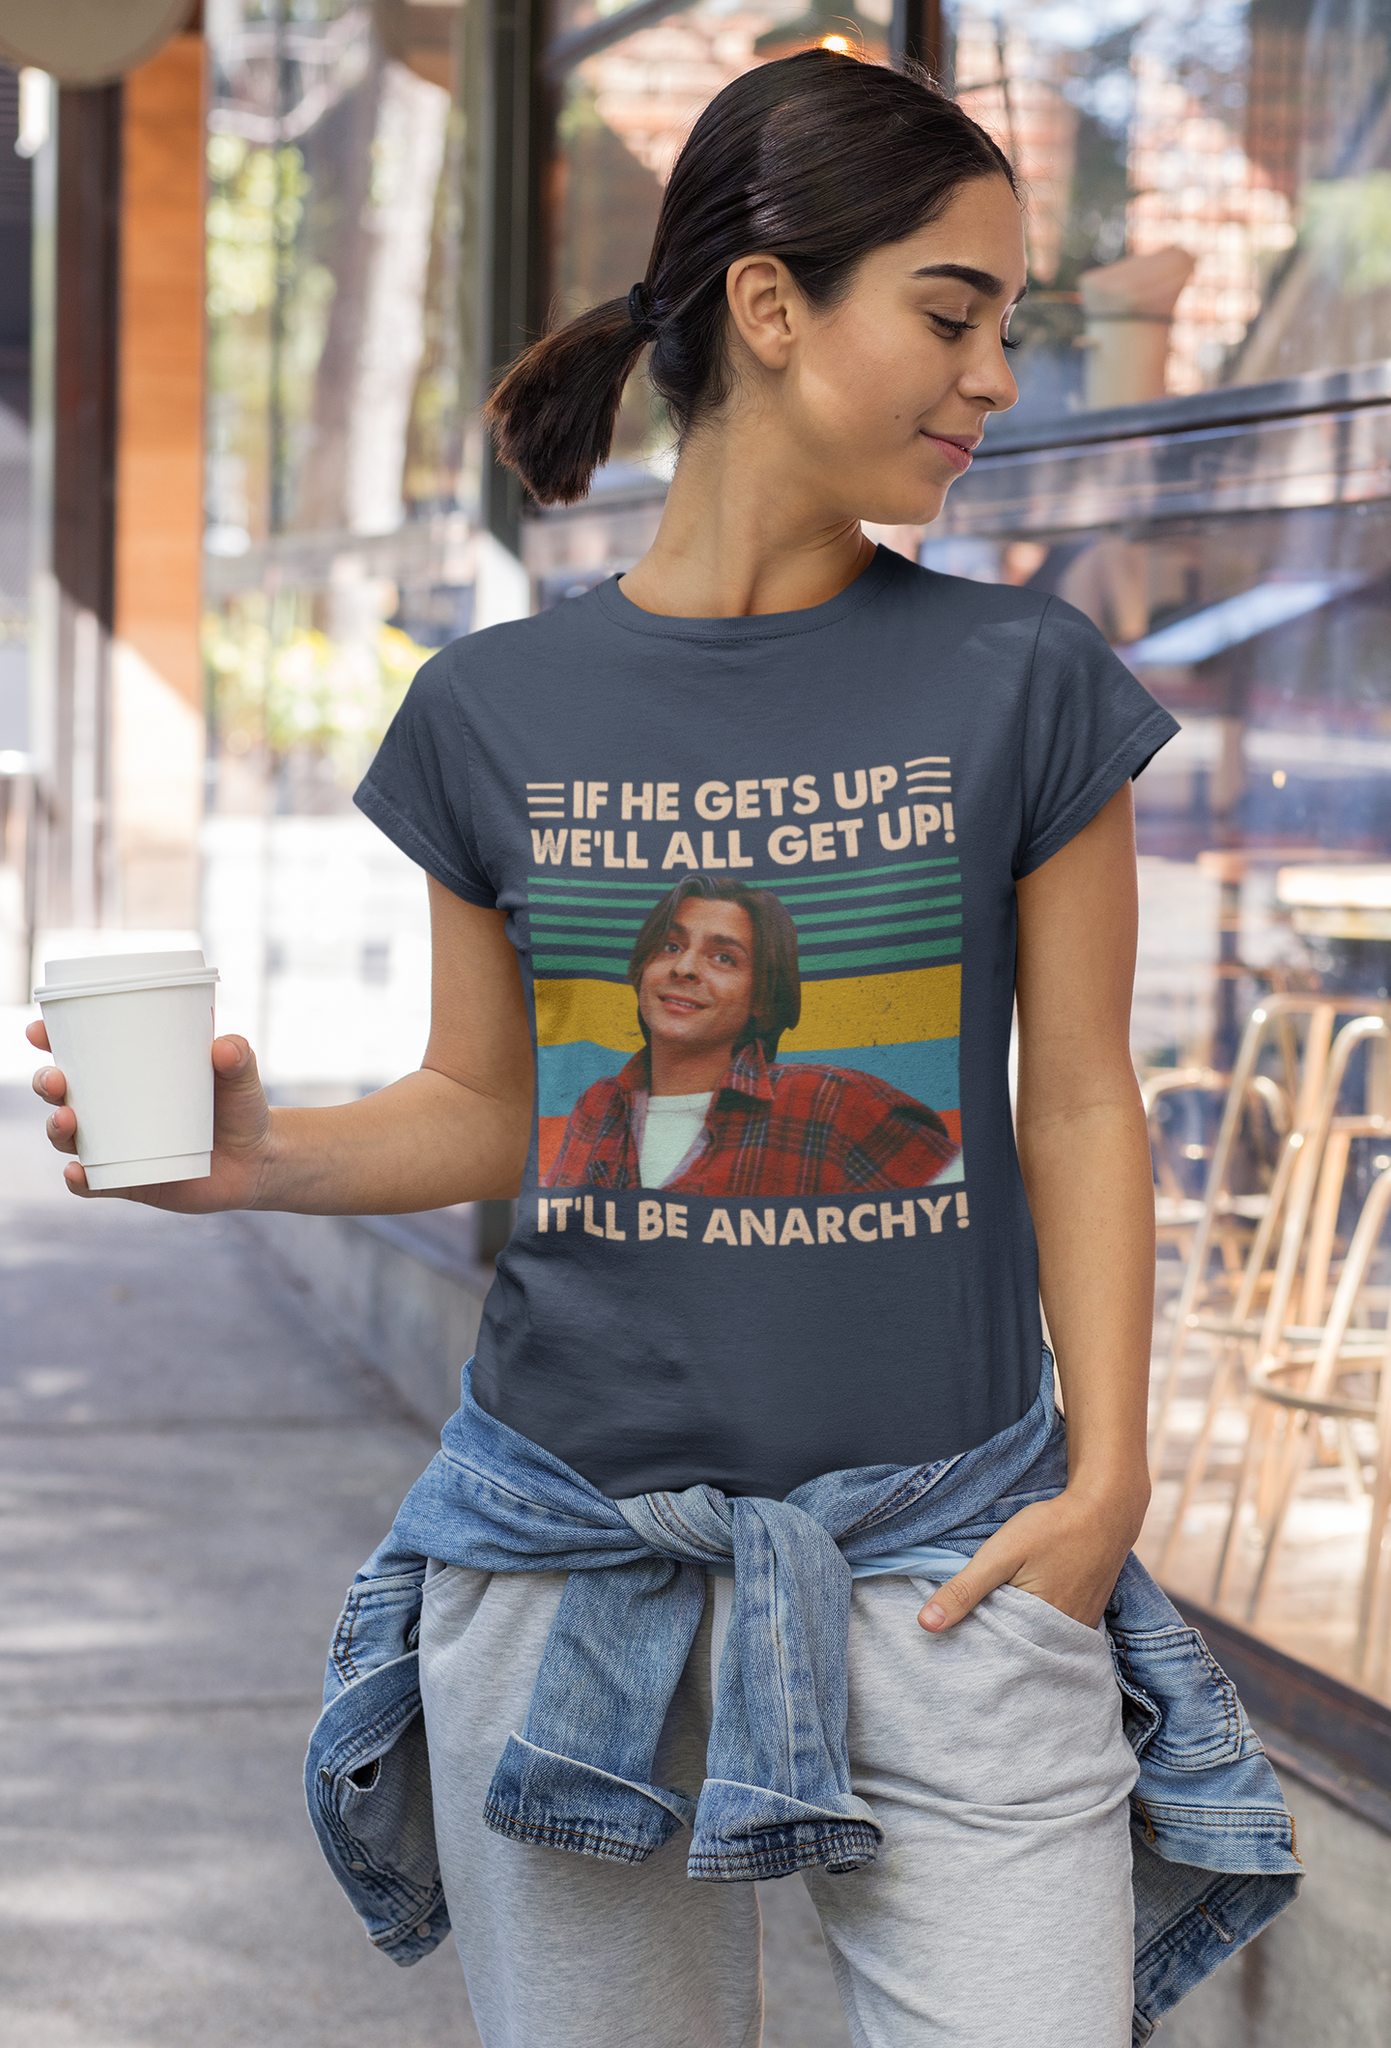 Breakfast Club Vintage T Shirt, John Bender Tshirt, If He Gets Up Well All Get Up Itll Be Anarchy T Shirt